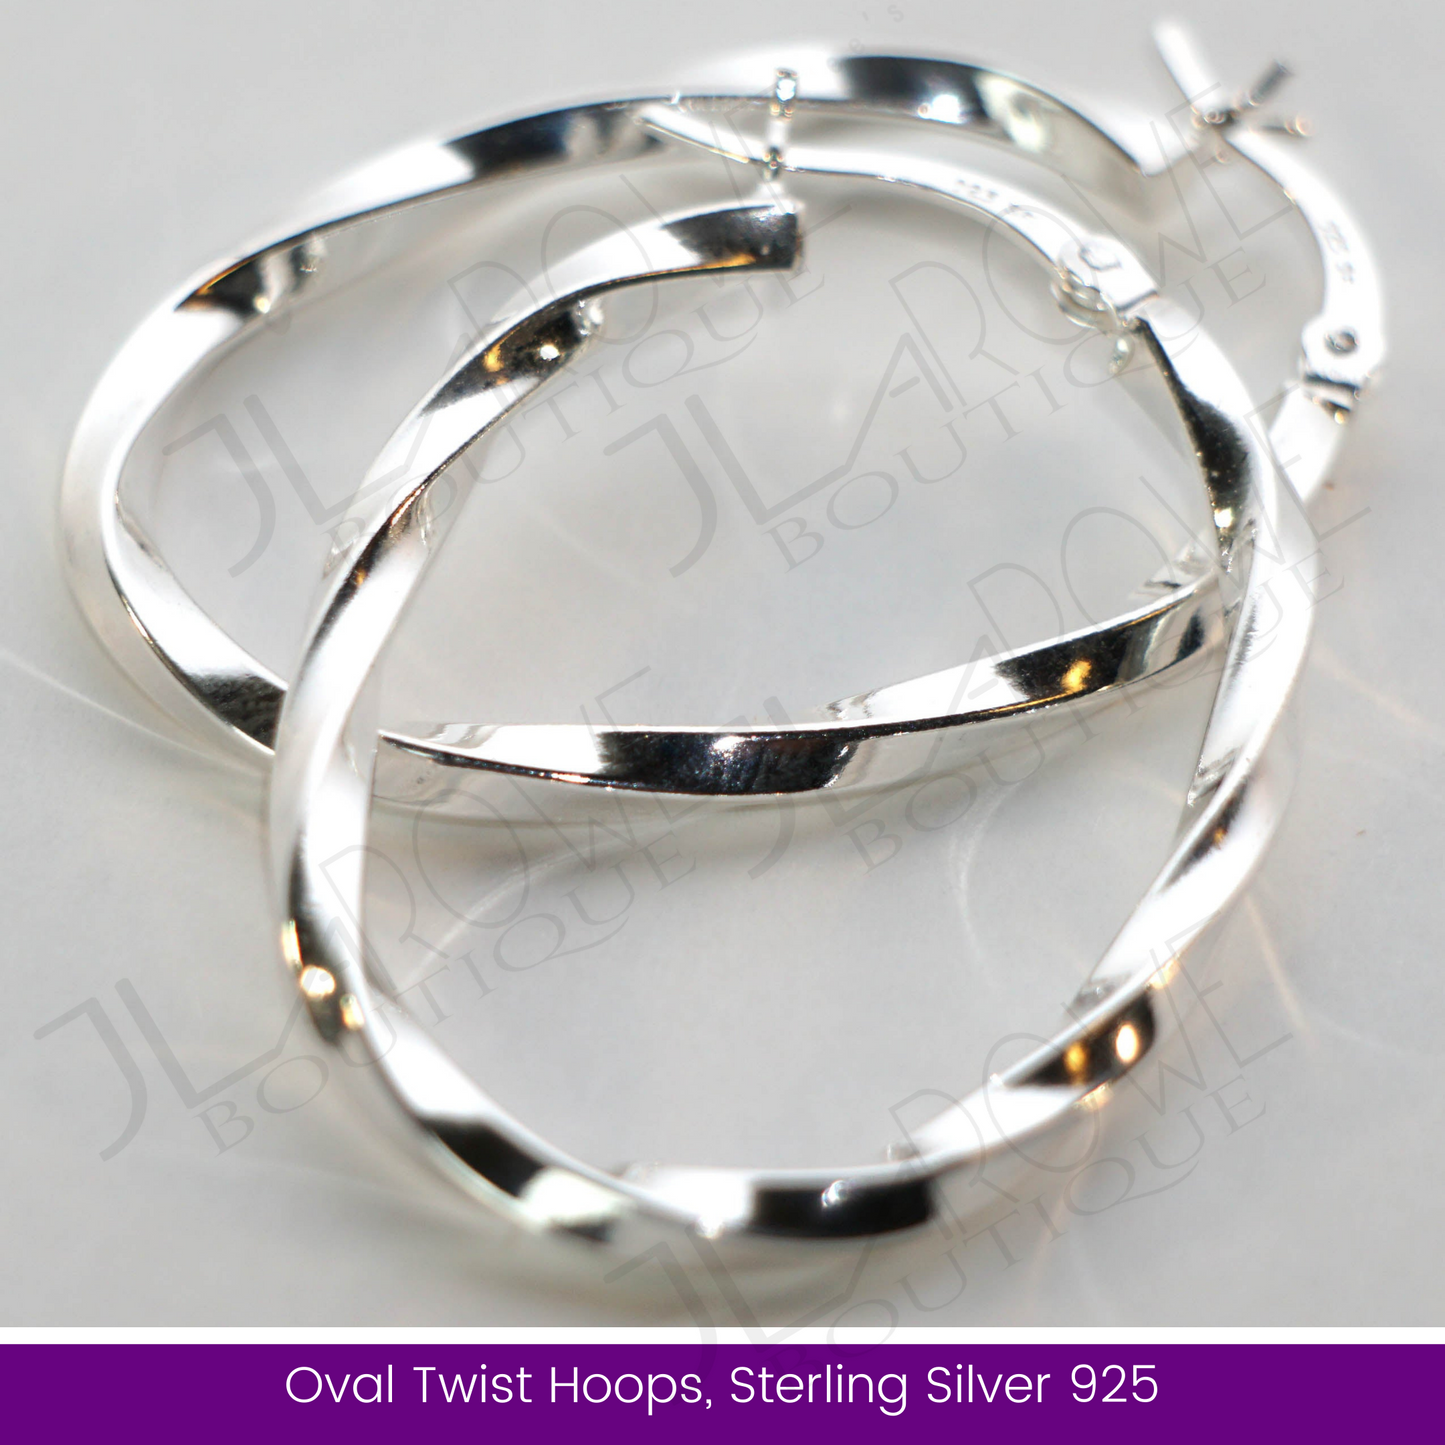 Oval Twist Hoops, Sterling Silver 925 (Limited Stock)